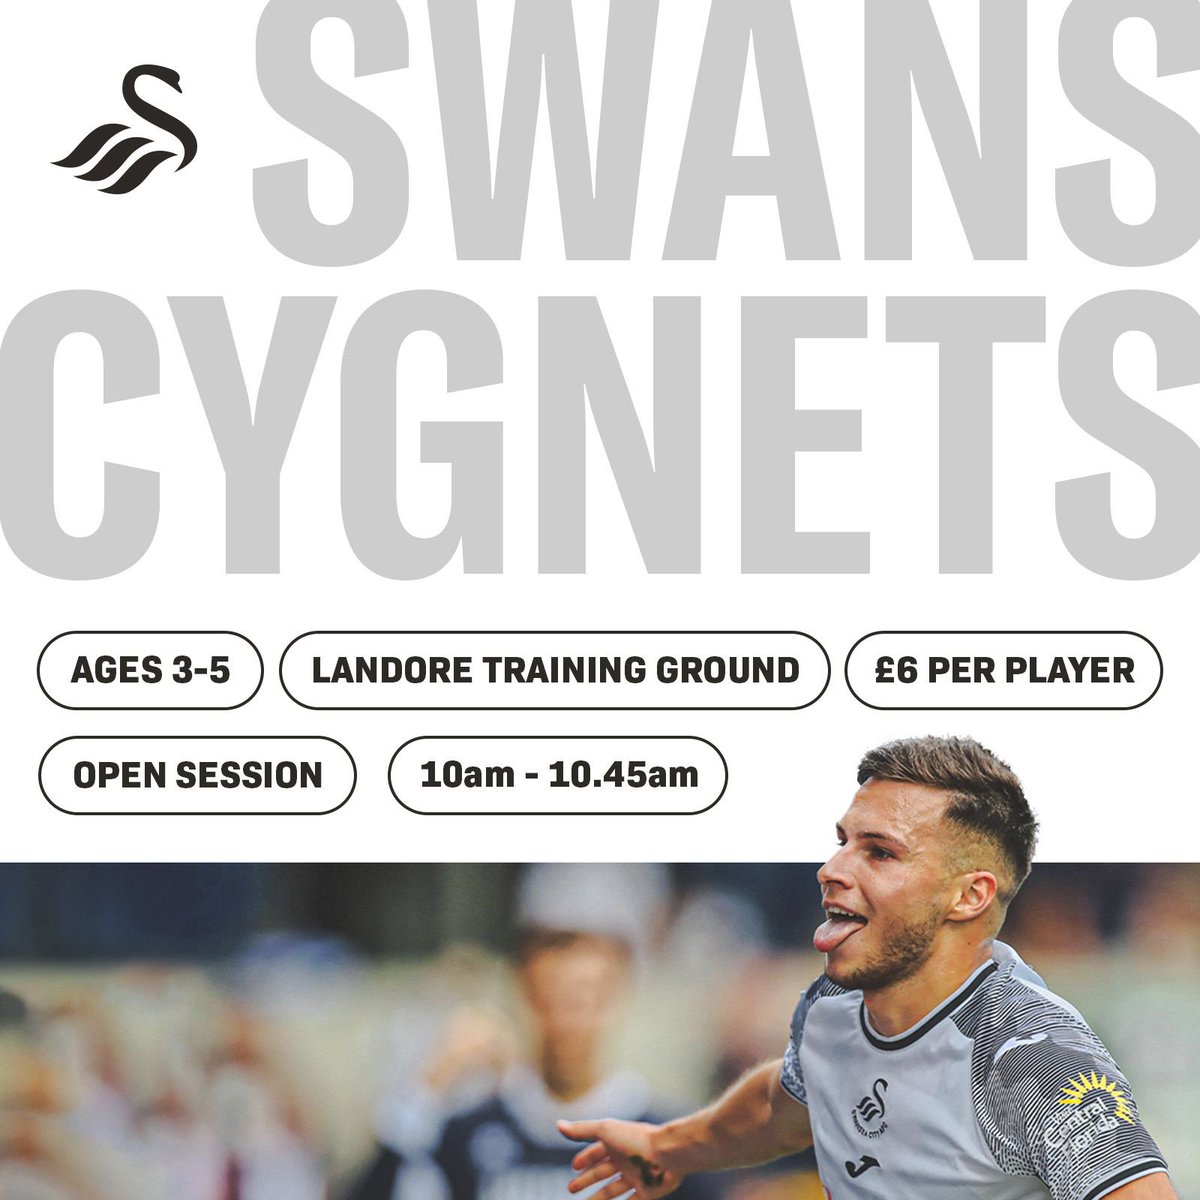 𝙎𝙒𝘼𝙉𝙎 𝘾𝙔𝙂𝙉𝙀𝙏𝙎 𝘾𝙊𝙈𝙄𝙉𝙂 𝙎𝙊𝙊𝙉 🔜 An open opportunity for 3-5 year-olds to attend football sessions at Swansea City academy on Saturday mornings 🦢 Register here 👉 forms.office.com/e/Bi2xMKBMxy